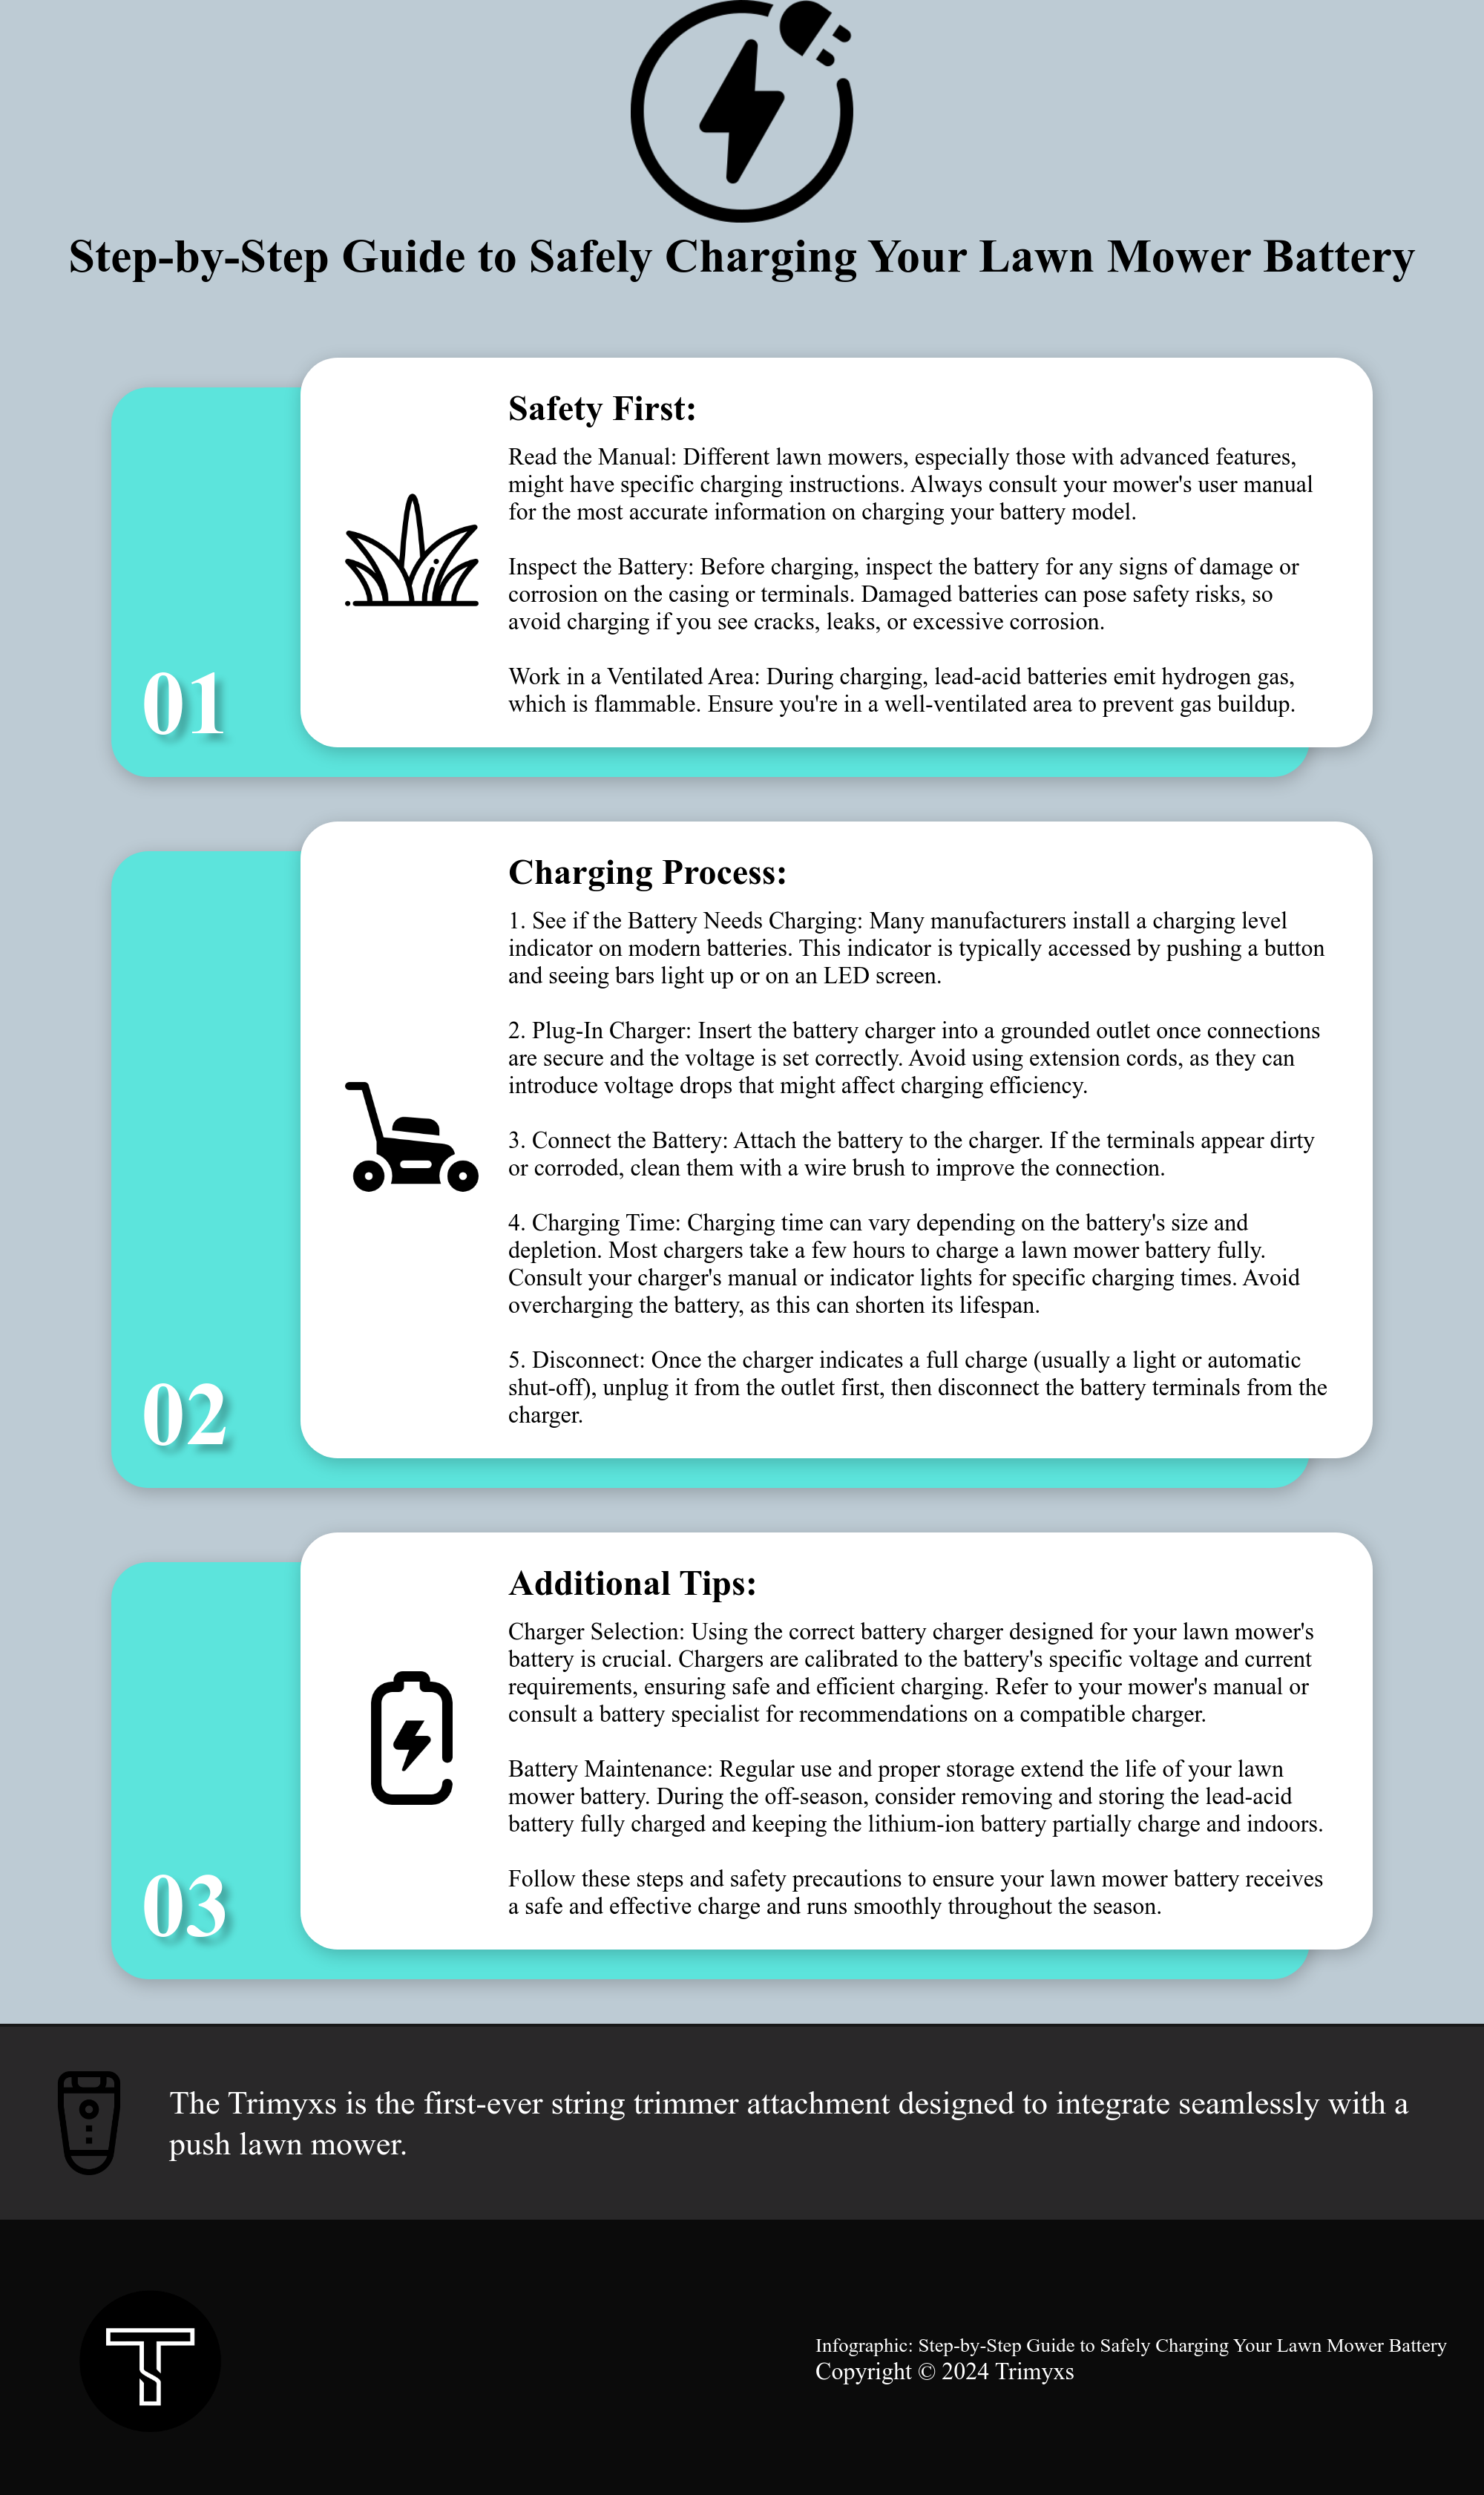 Safely Charging Your Lawn Mower Battery Guide infographics